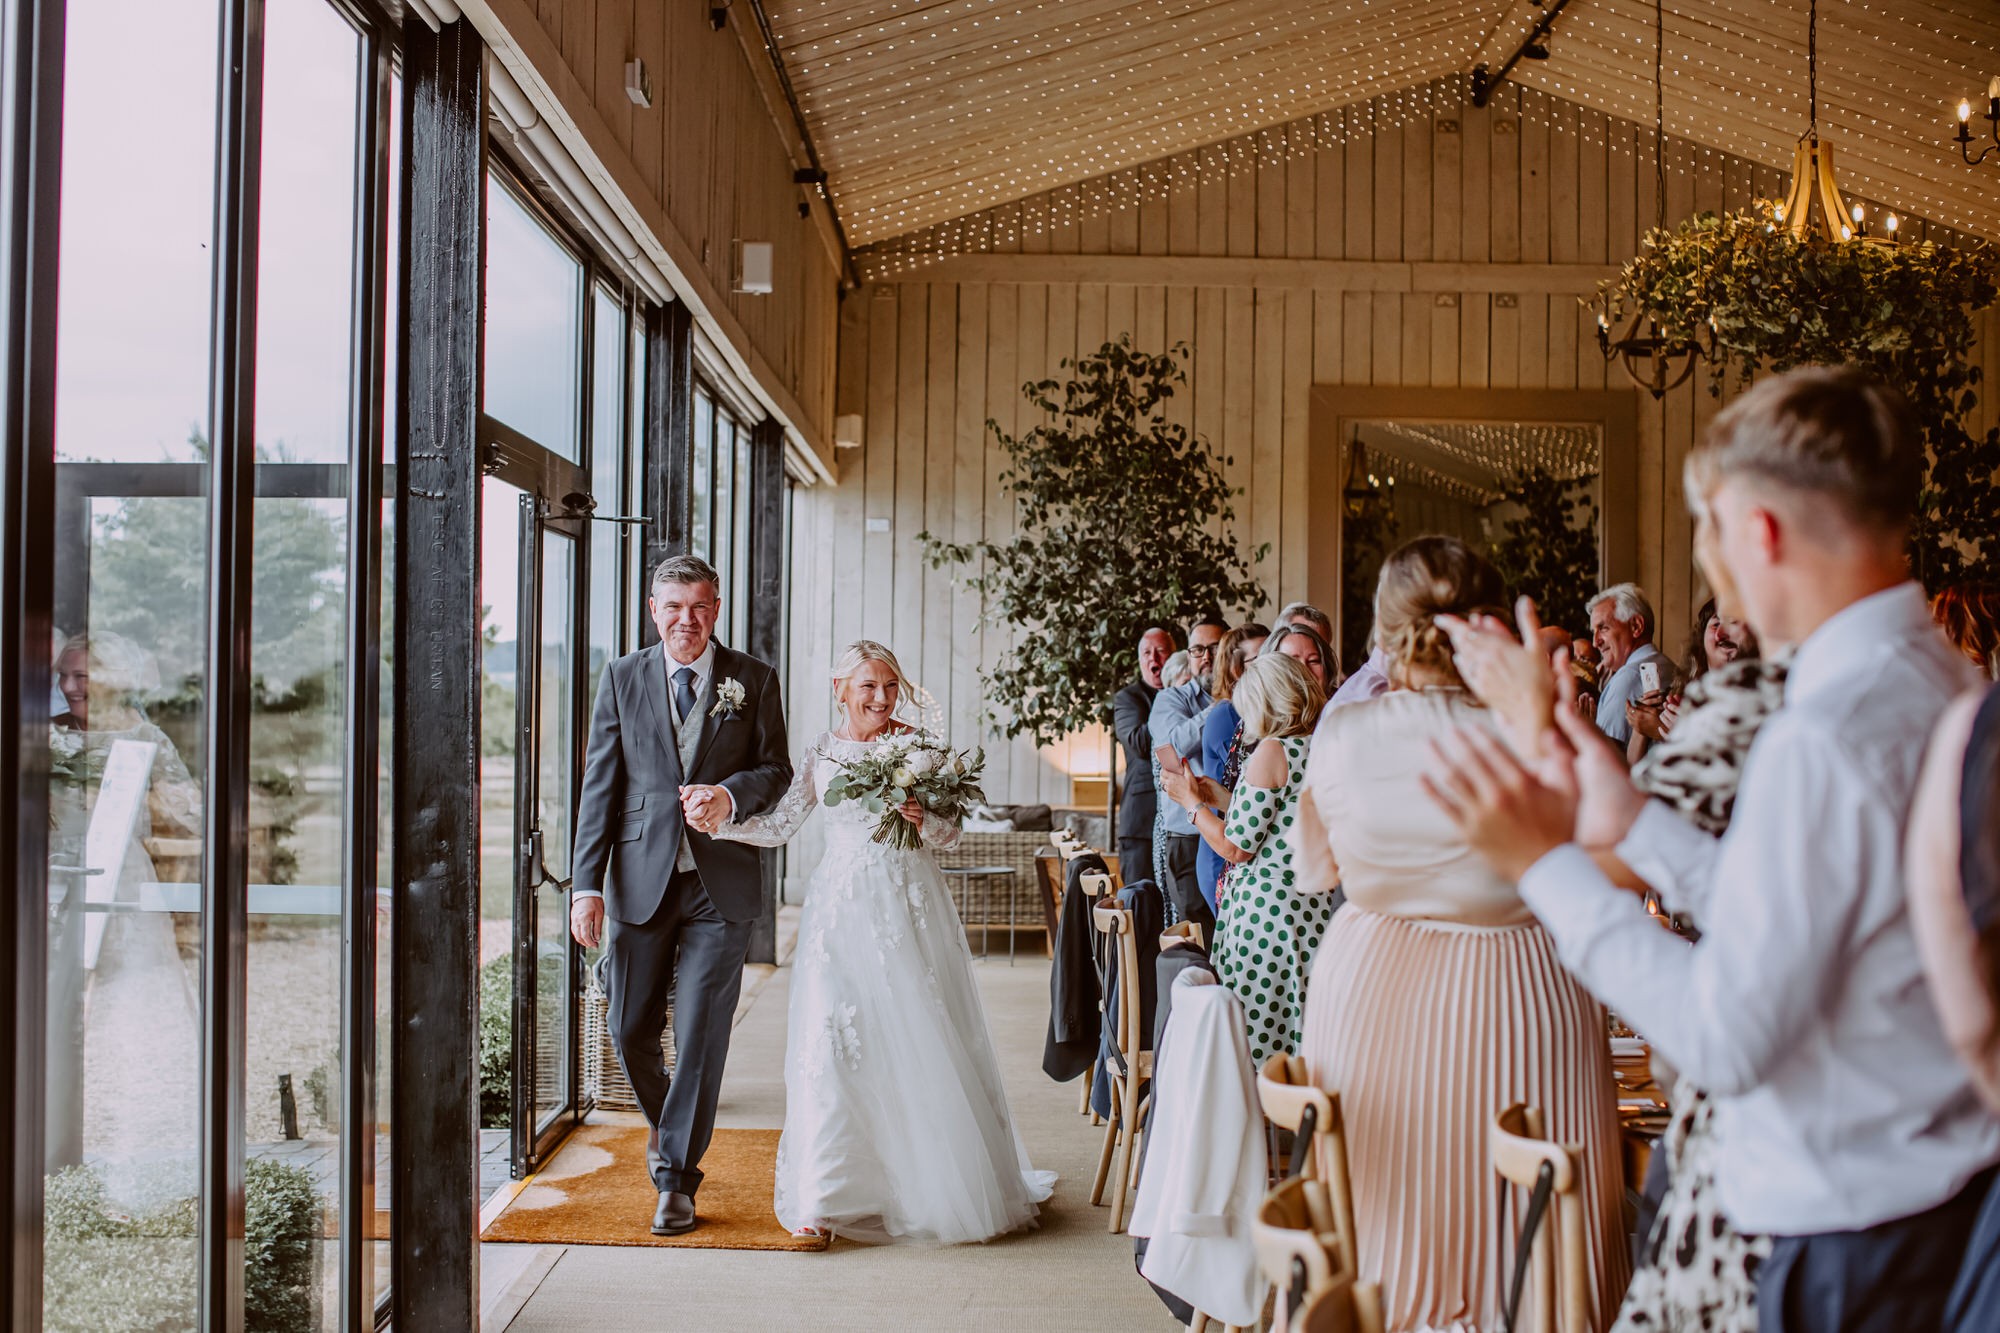 Guests clapping to freshly married couple entering the reception barn at Primrose Hill Farm 